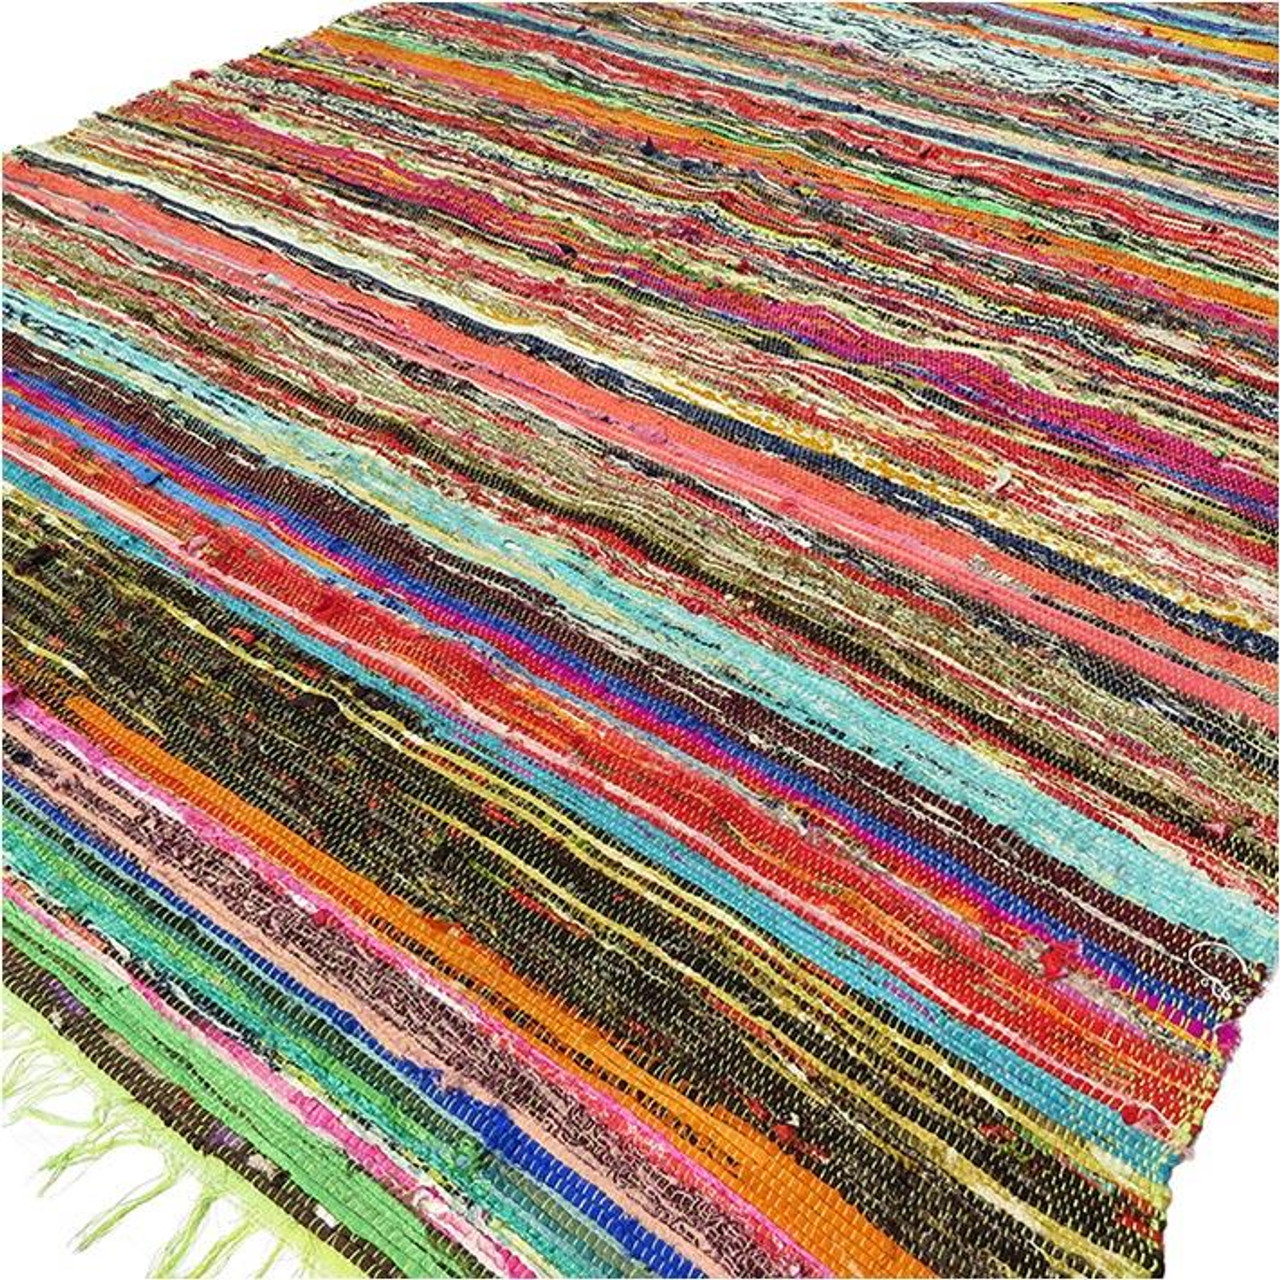 Luxury Rag Rug - Recycled Material - 150cm x 90cm - Hand Woven - Green